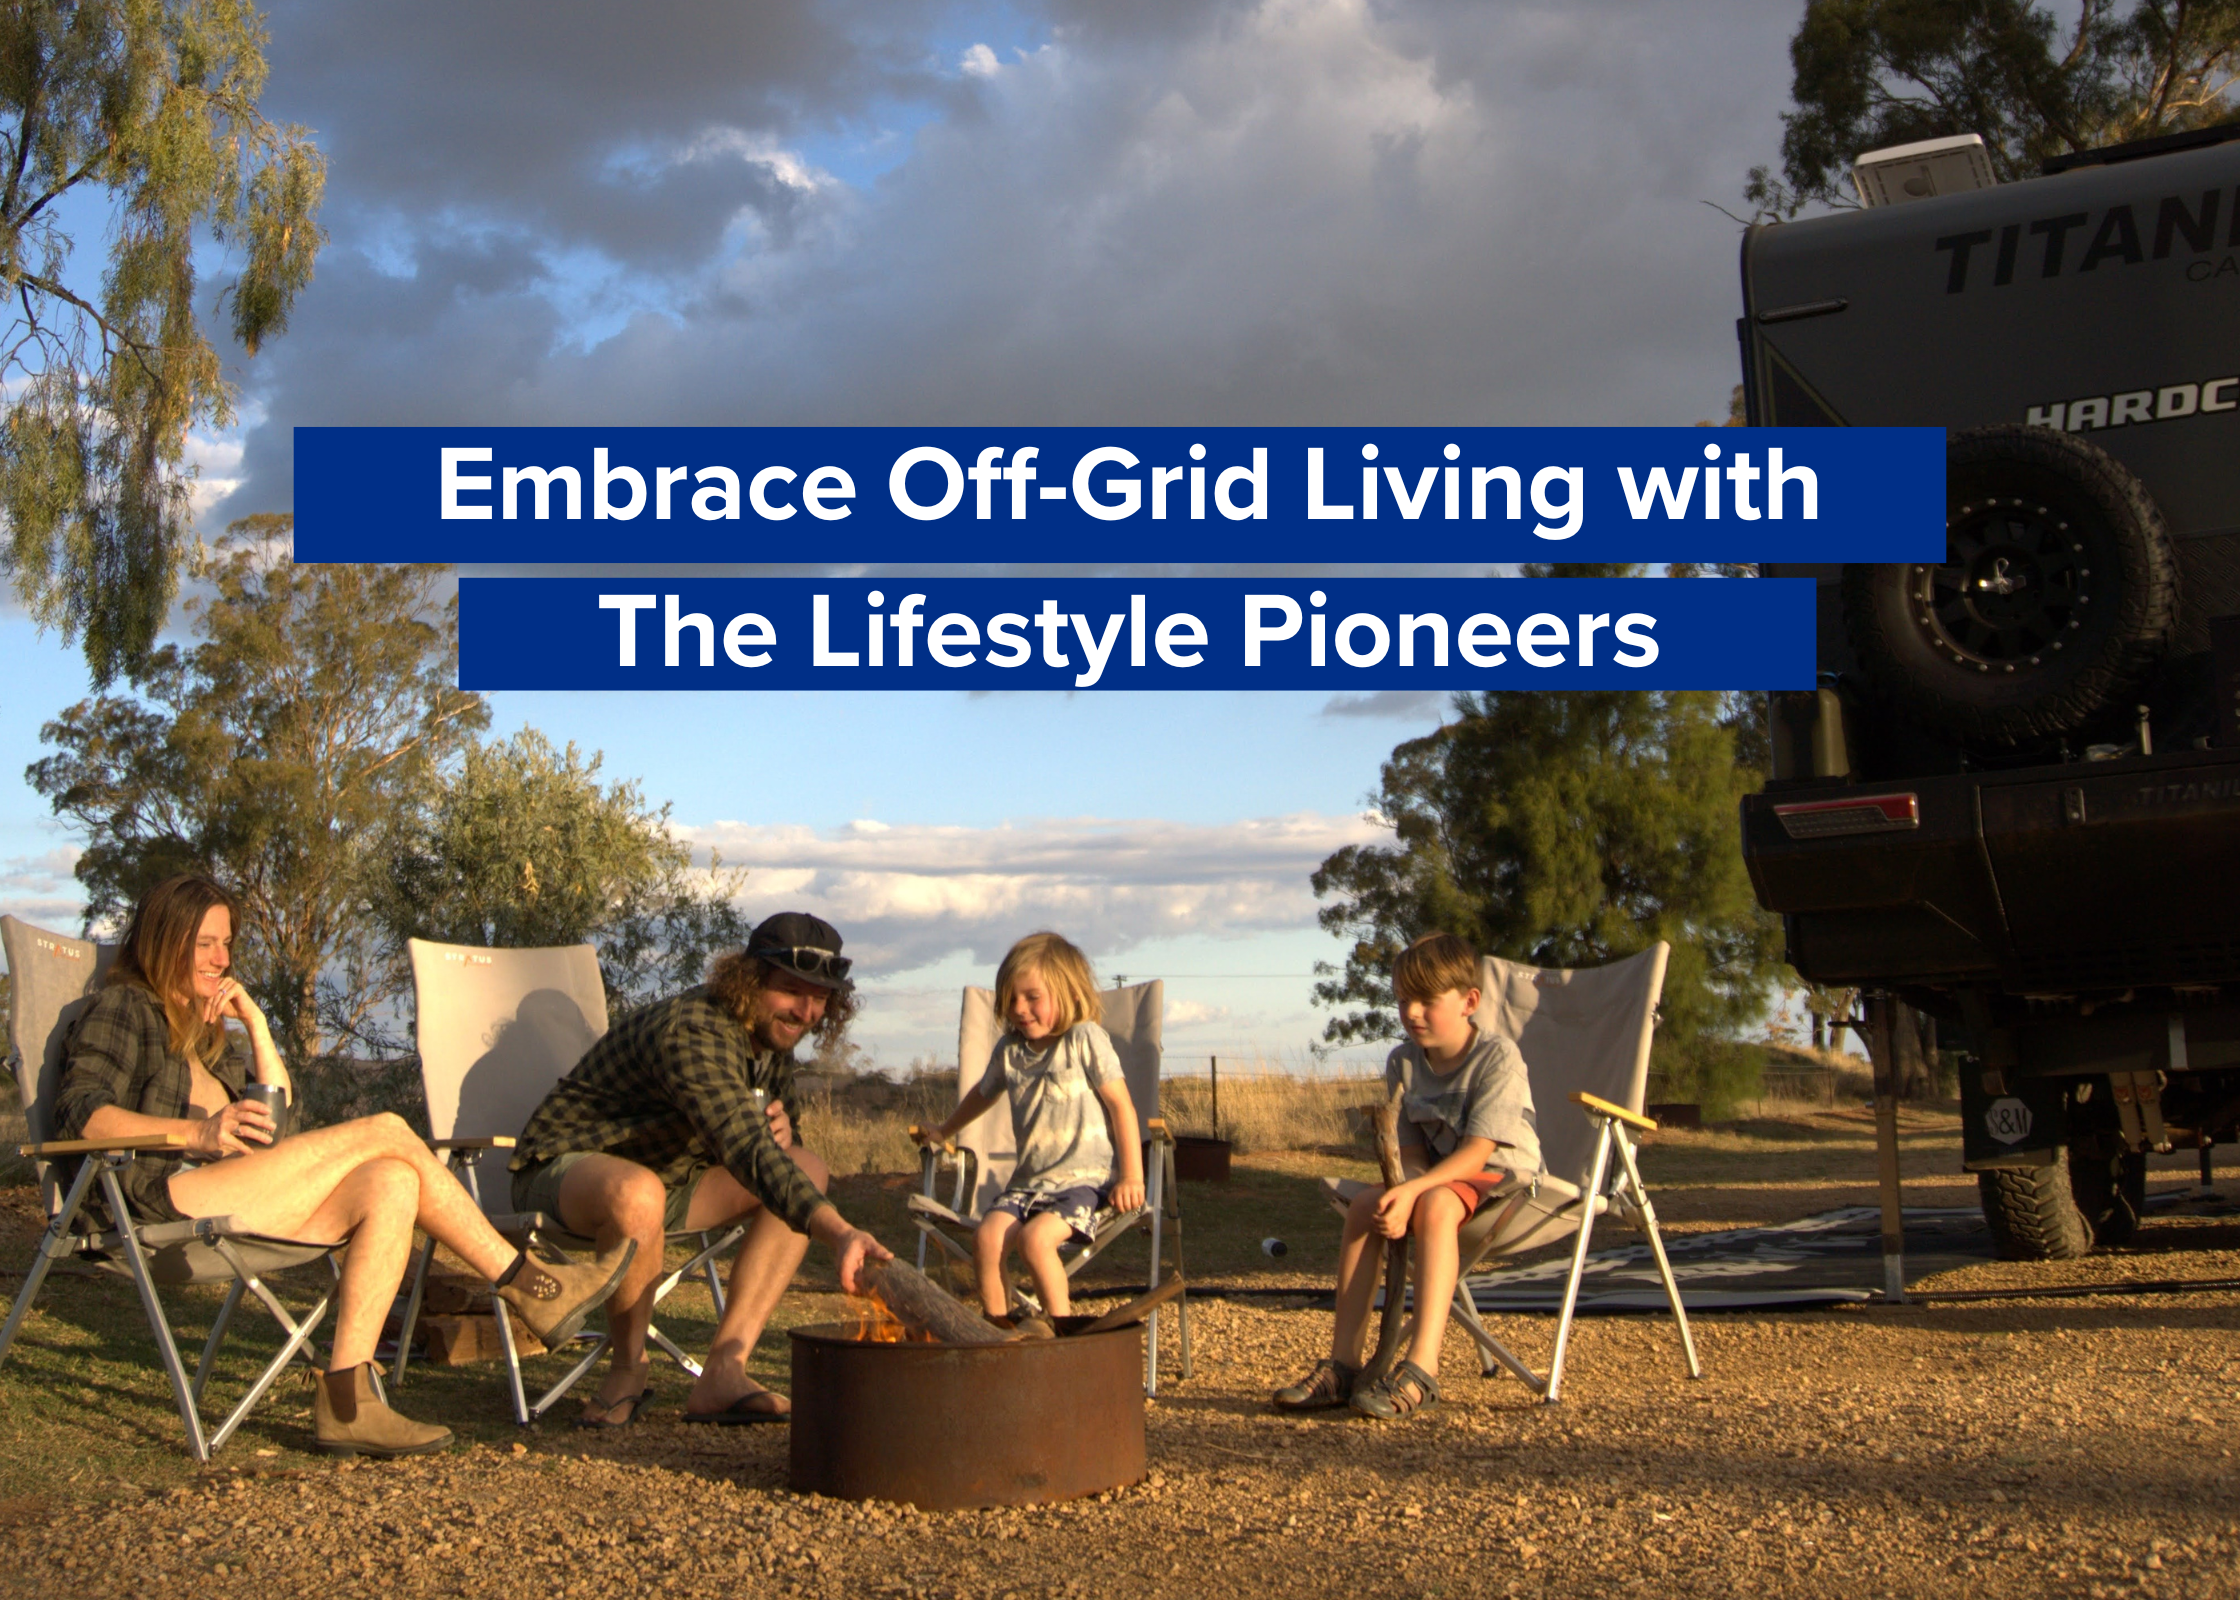 Feature: The Lifestyle Pioneers